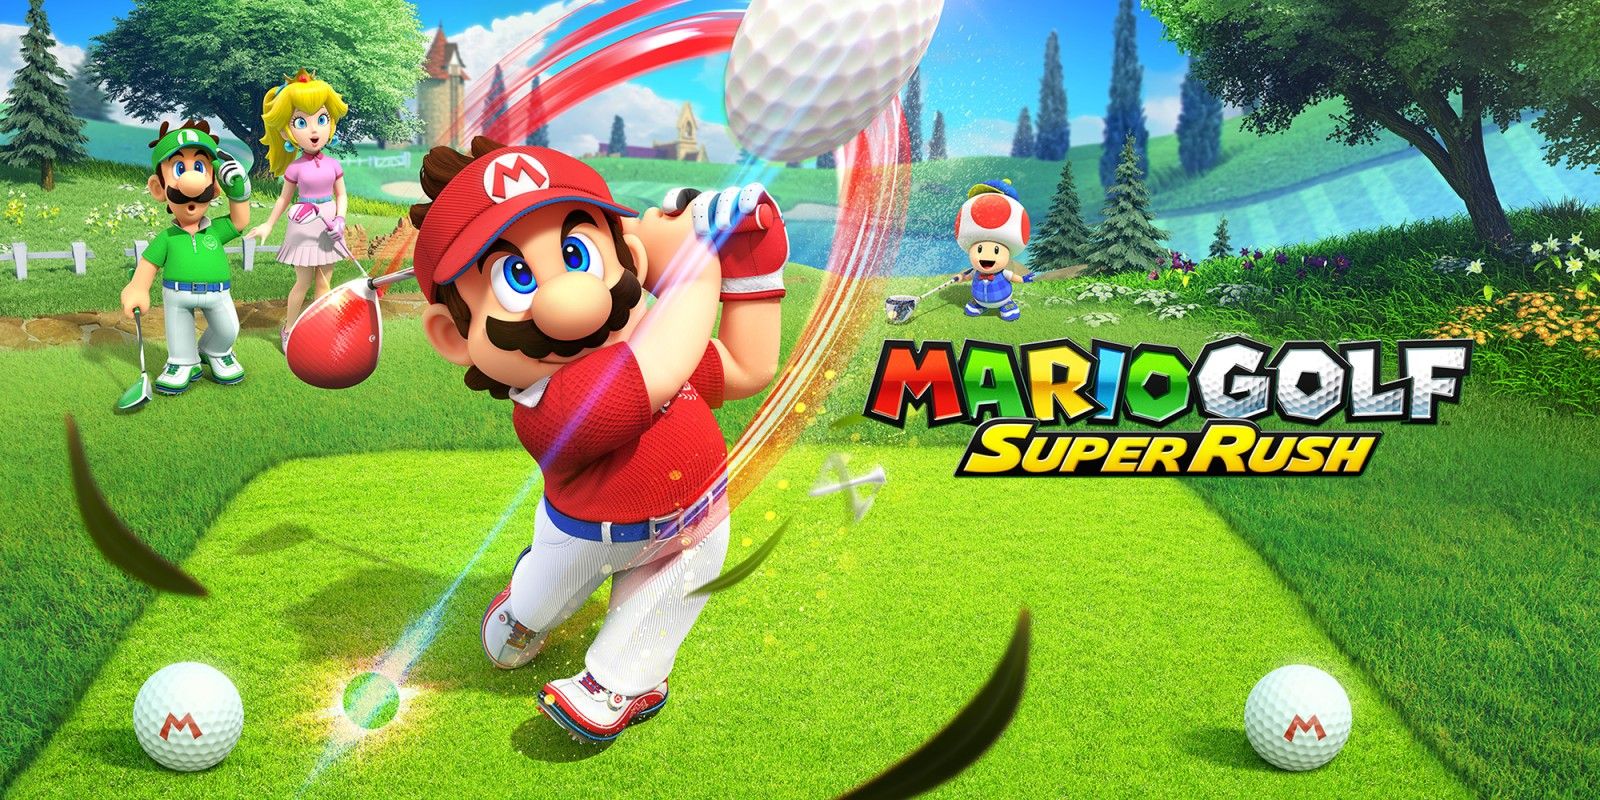 The new trailer for Mario Golf: Super Rush showed new items